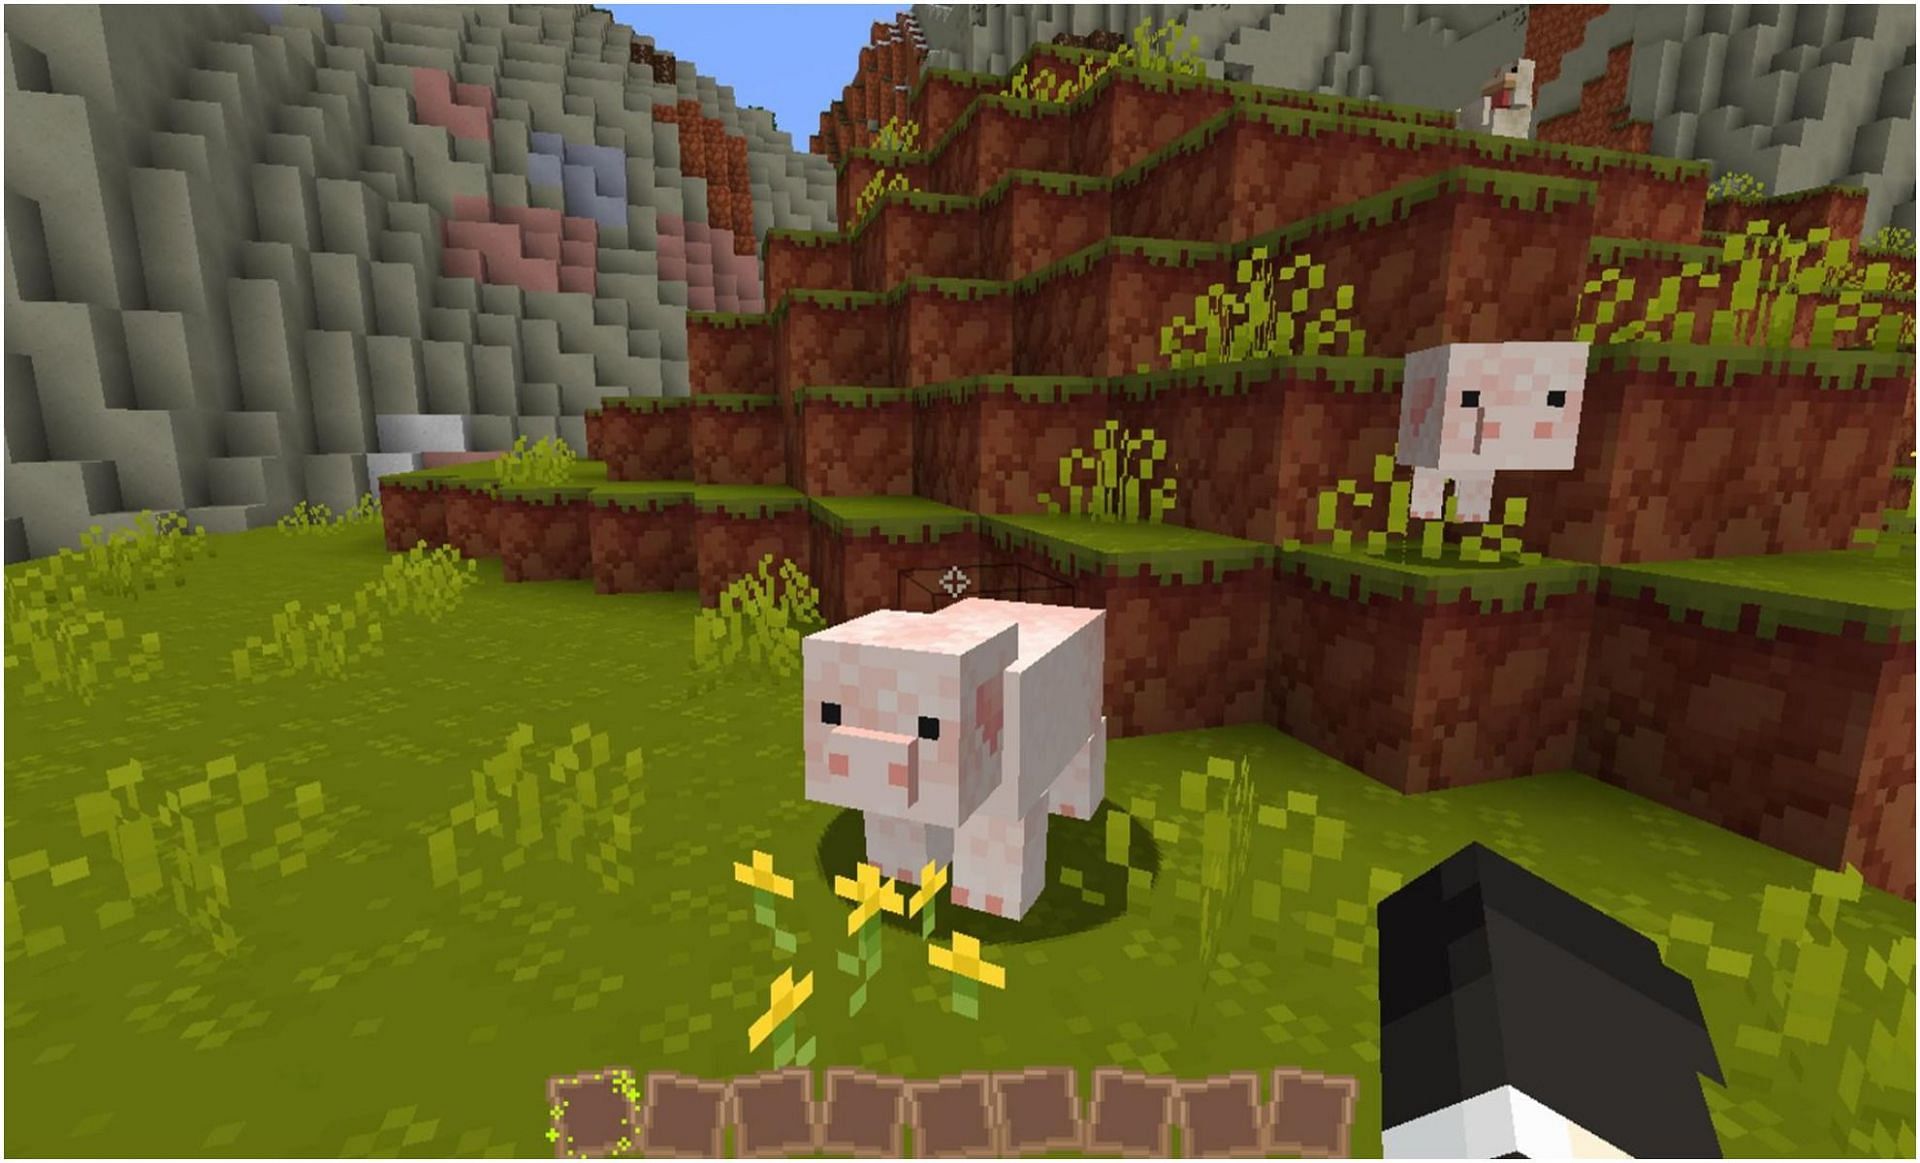 Cuter textures of Pigs in Minecraft (Image via Minecraft)